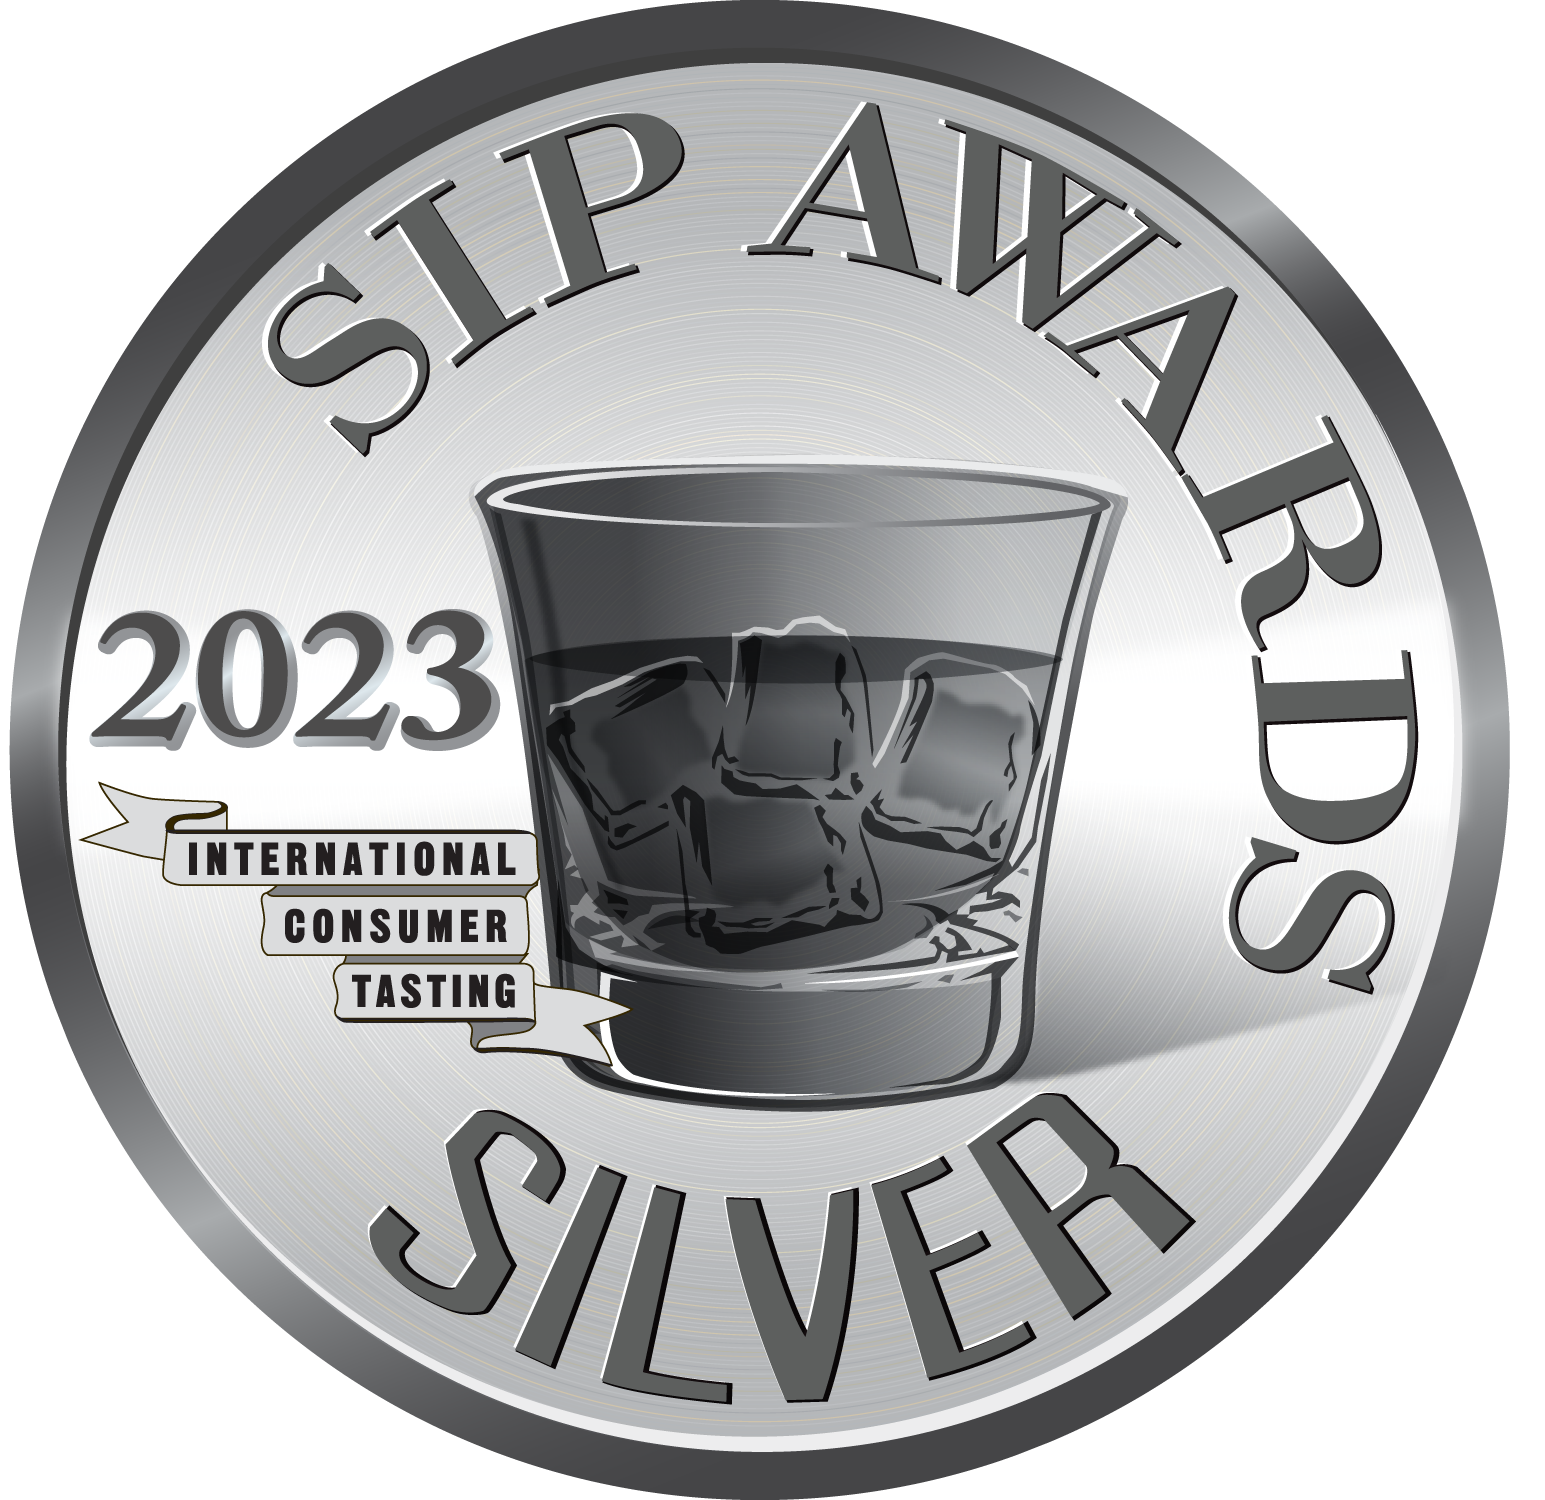 Mixoloshe won the Sip Awards Silver Medal in 2023